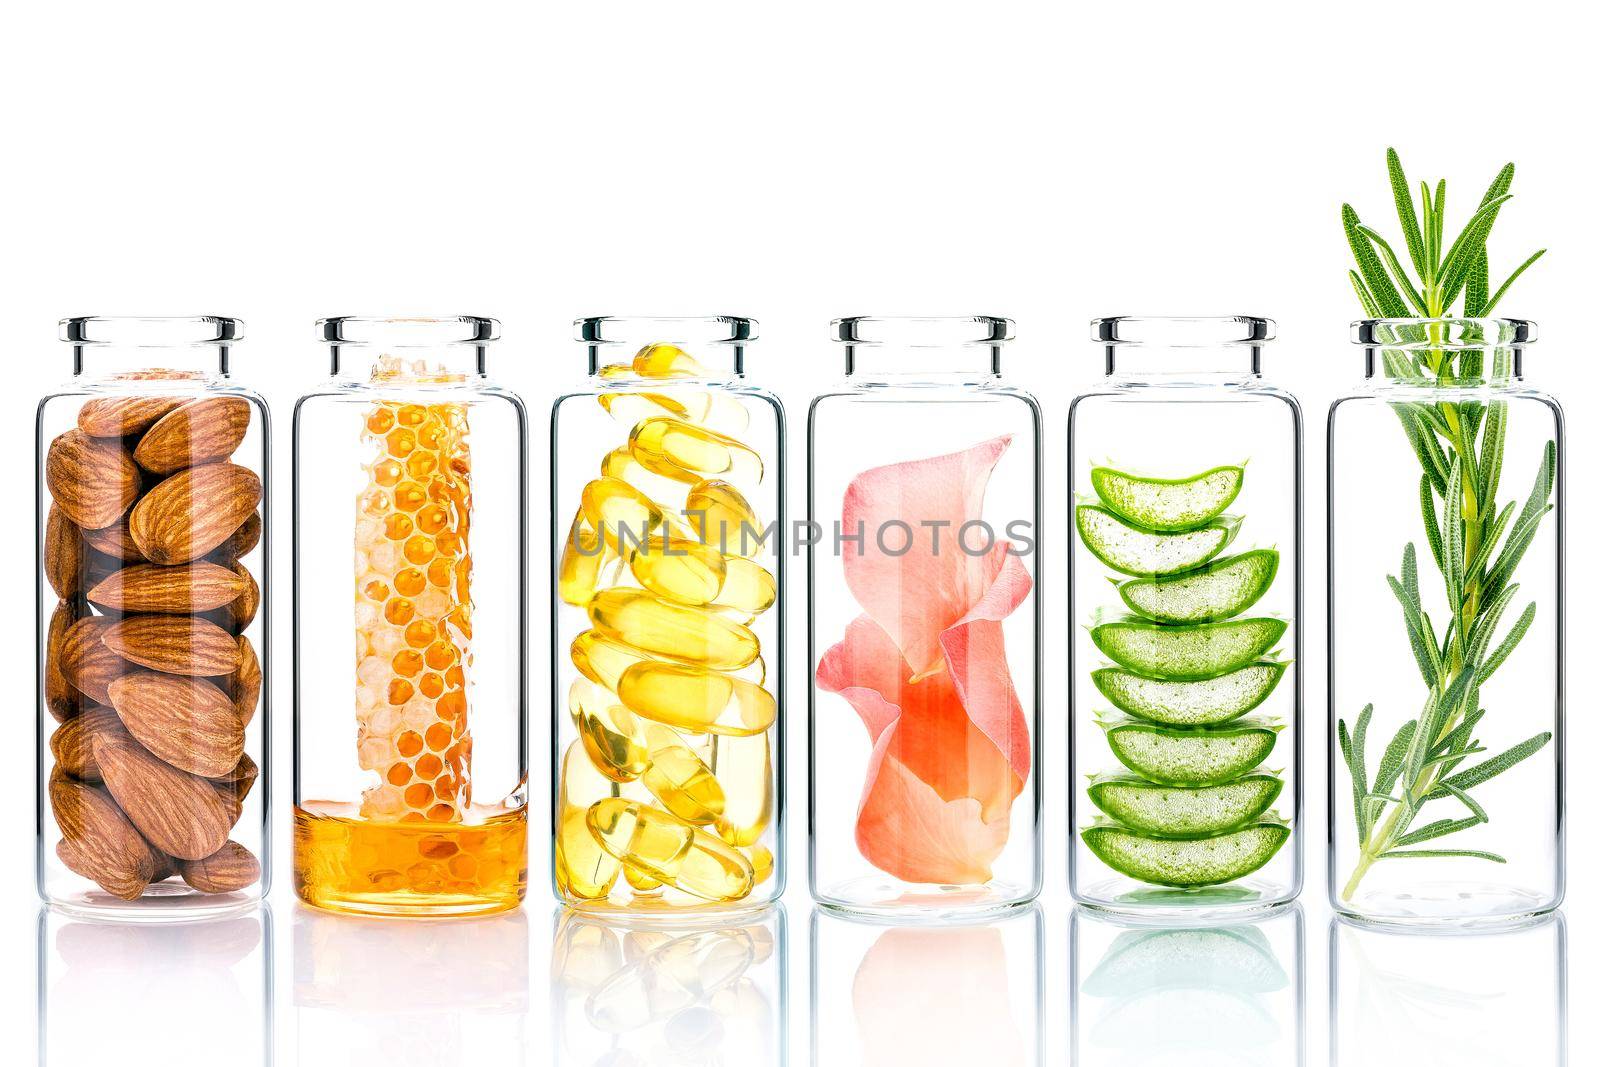 Homemade skin care with natural ingredients and herbs in glass bottles isolate on white background.